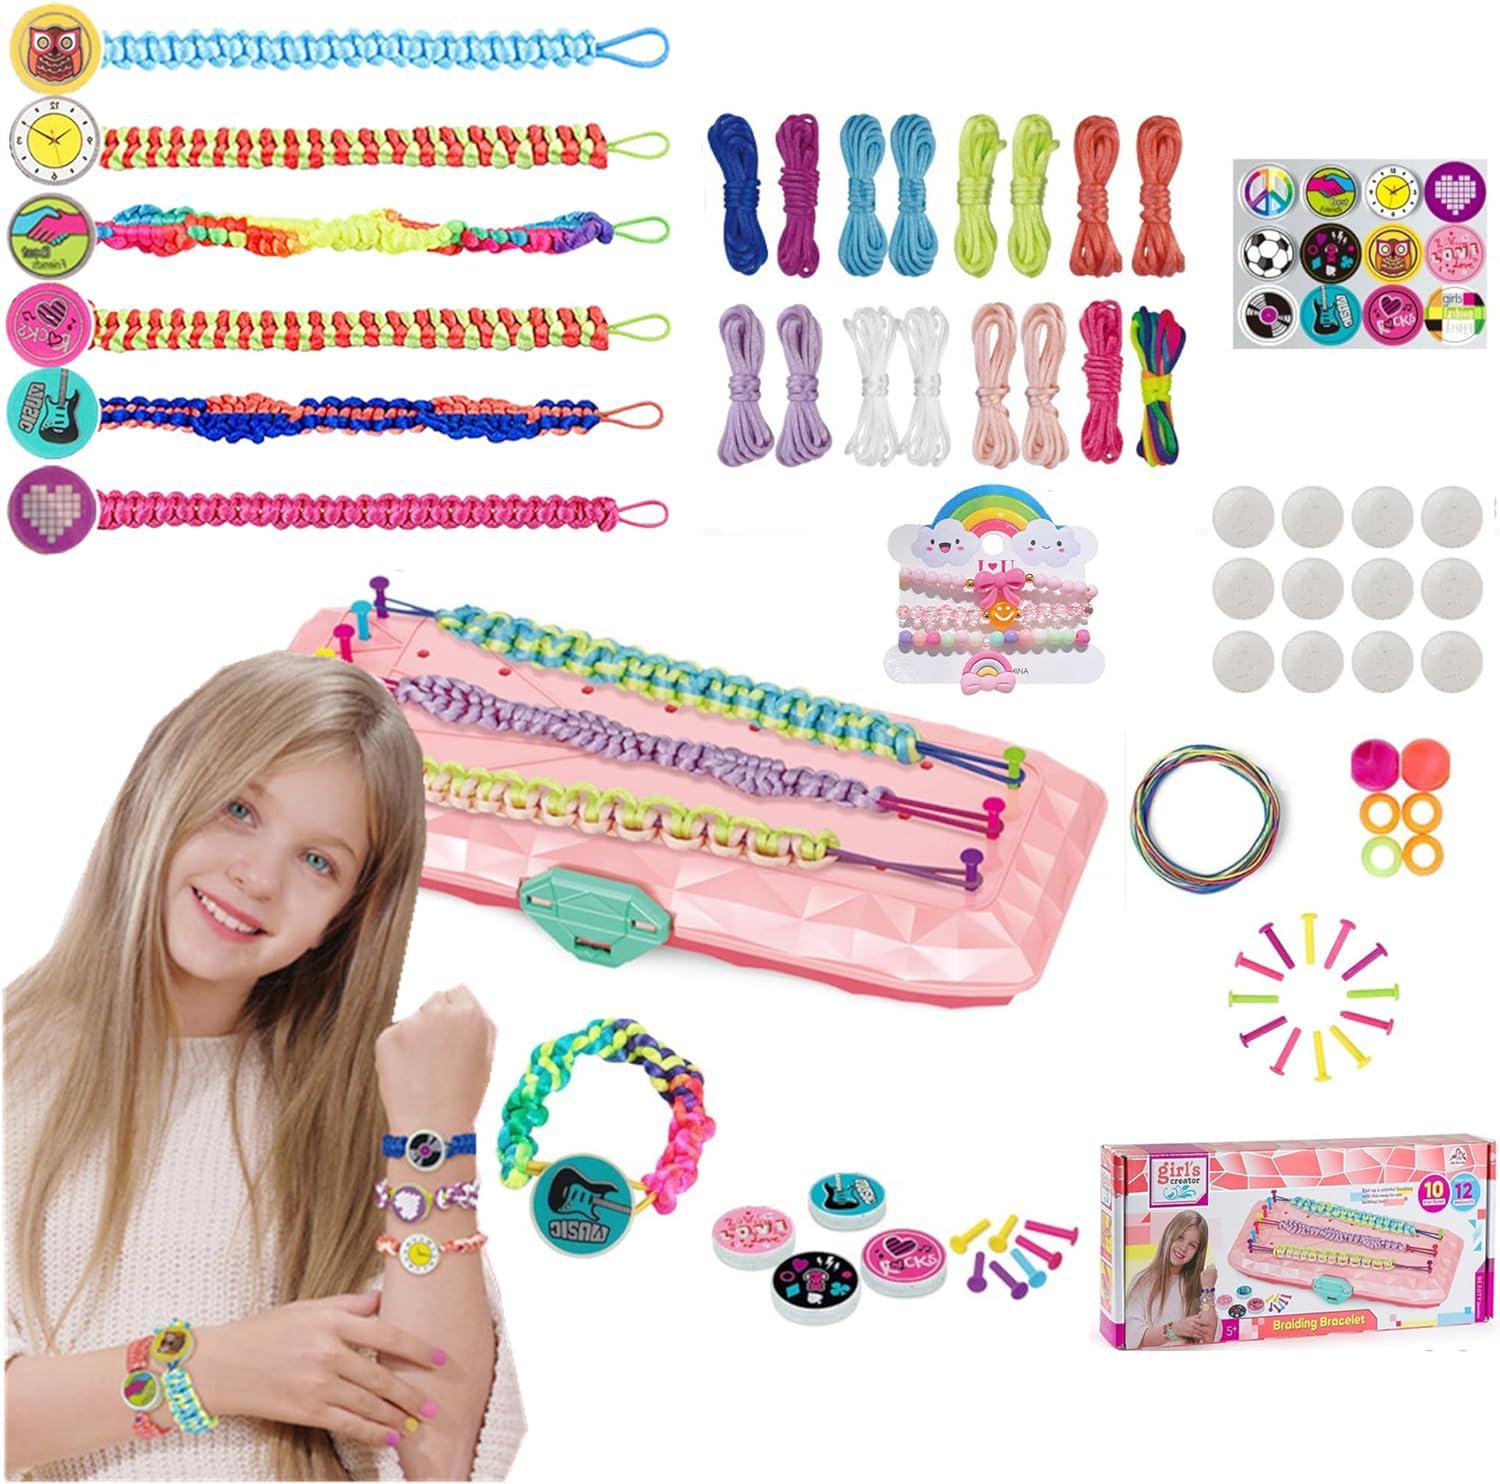 MontoSun Beads for Jewelry Making Kit Bead Kits for Kids Bead